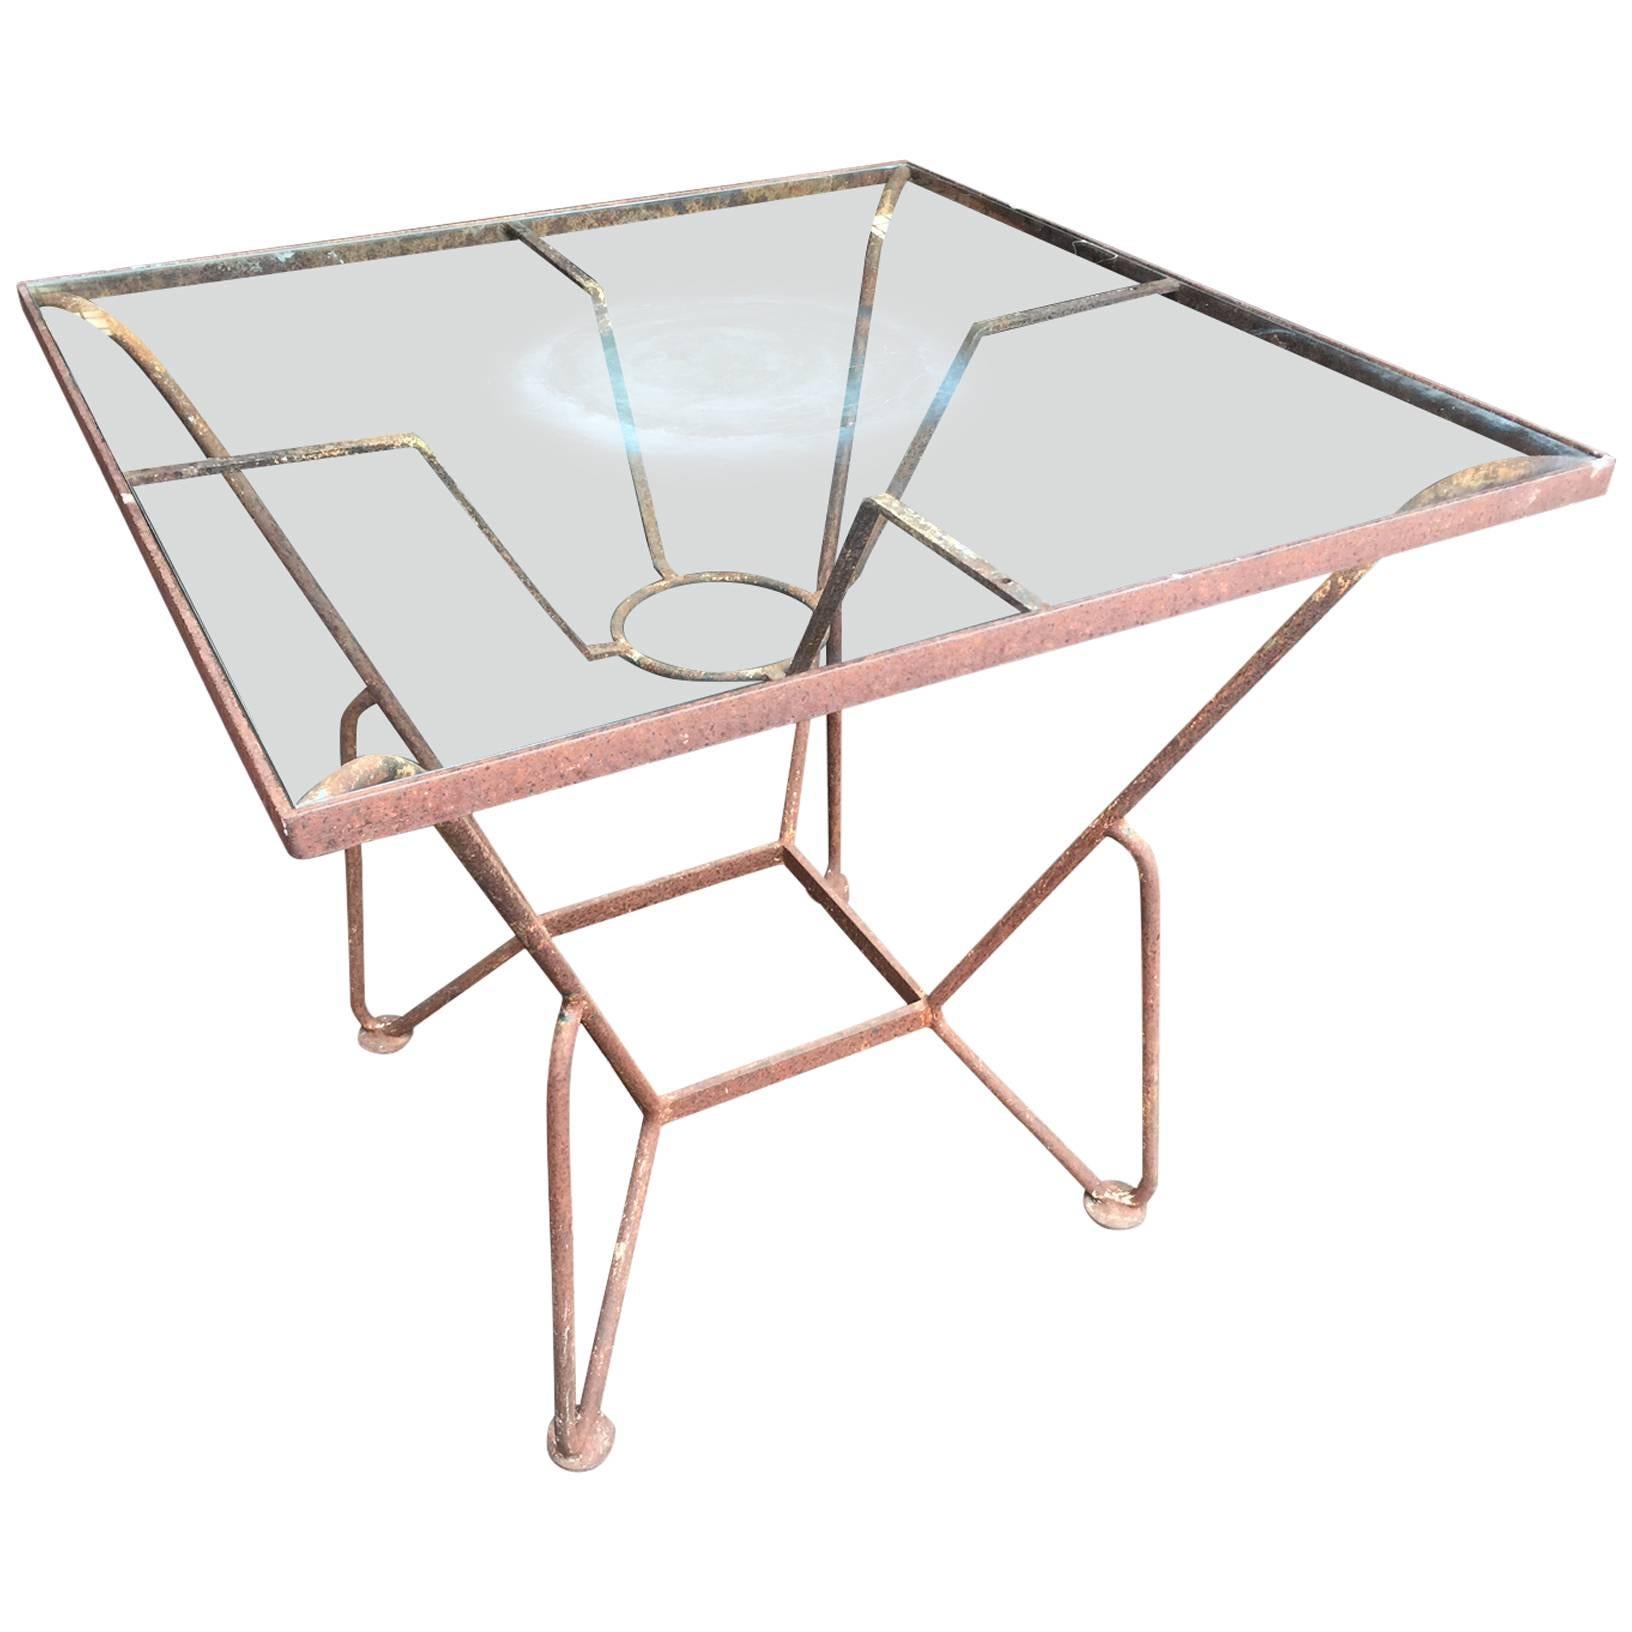 Iron and Glass Mid-Century Garden Table For Sale